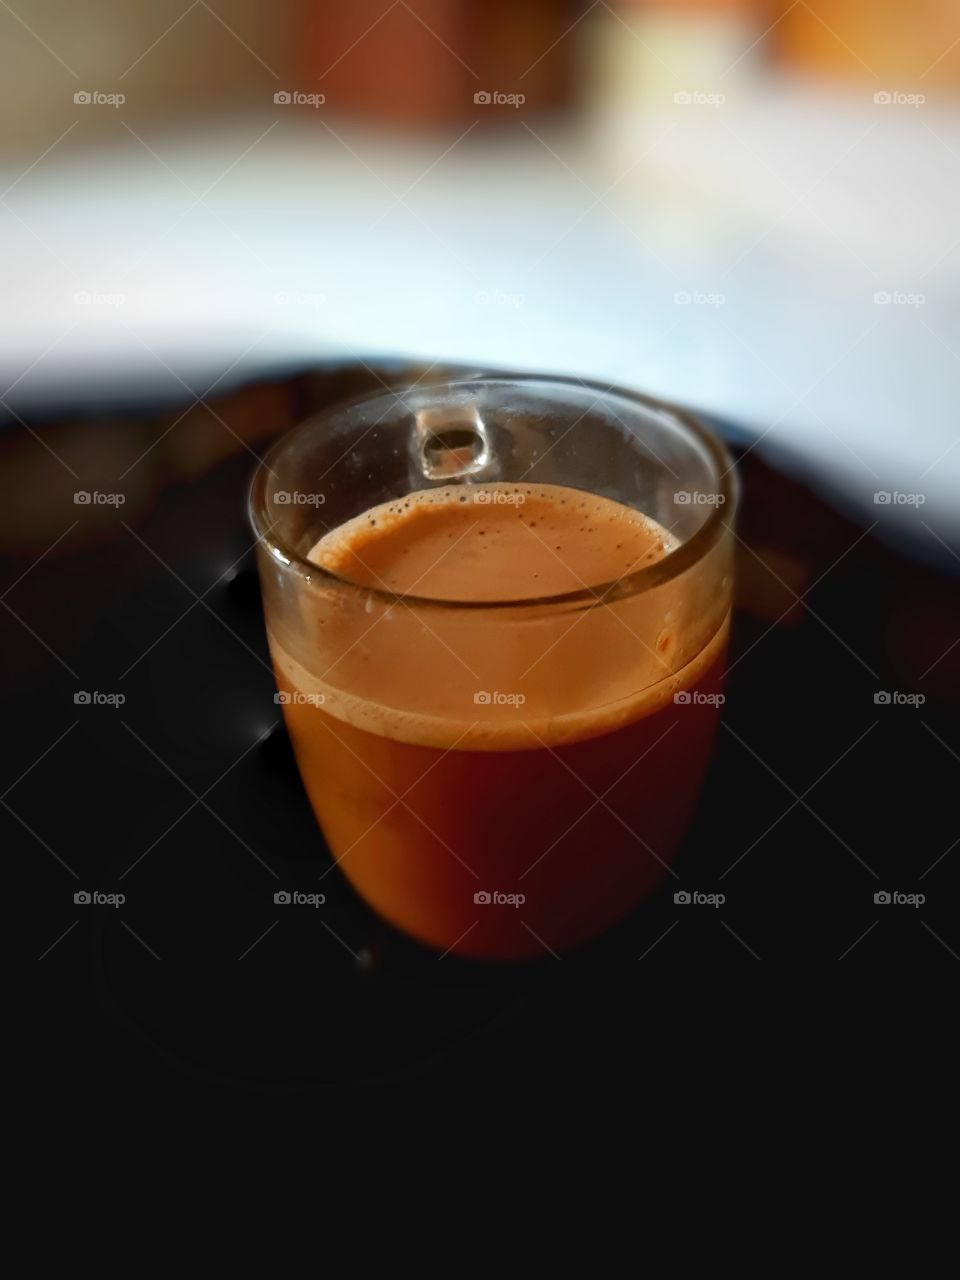 A cup of coffee on the black glass round table